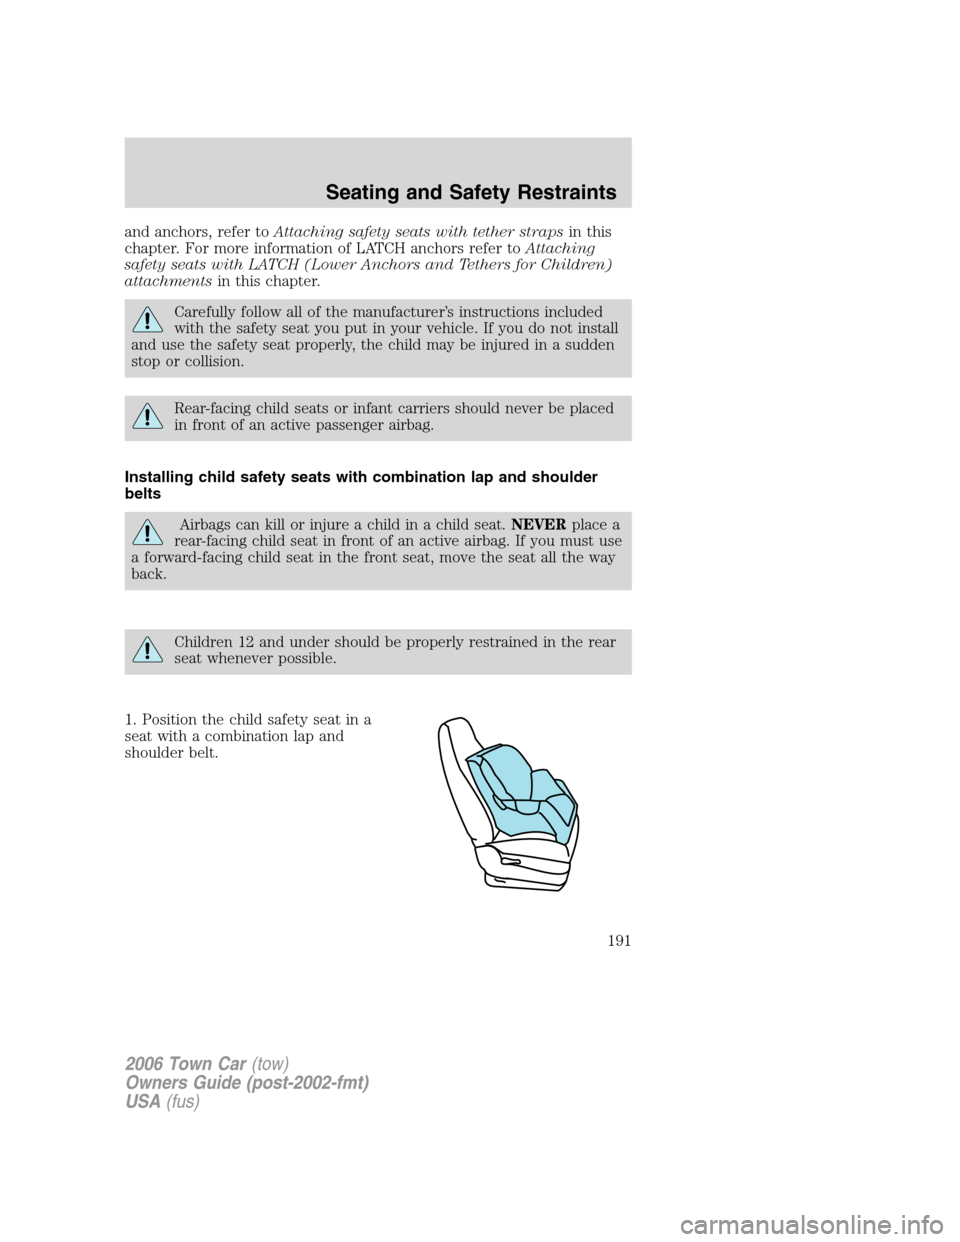 LINCOLN TOWN CAR 2006 Owners Guide and anchors, refer toAttaching safety seats with tether strapsin this
chapter. For more information of LATCH anchors refer toAttaching
safety seats with LATCH (Lower Anchors and Tethers for Children)
